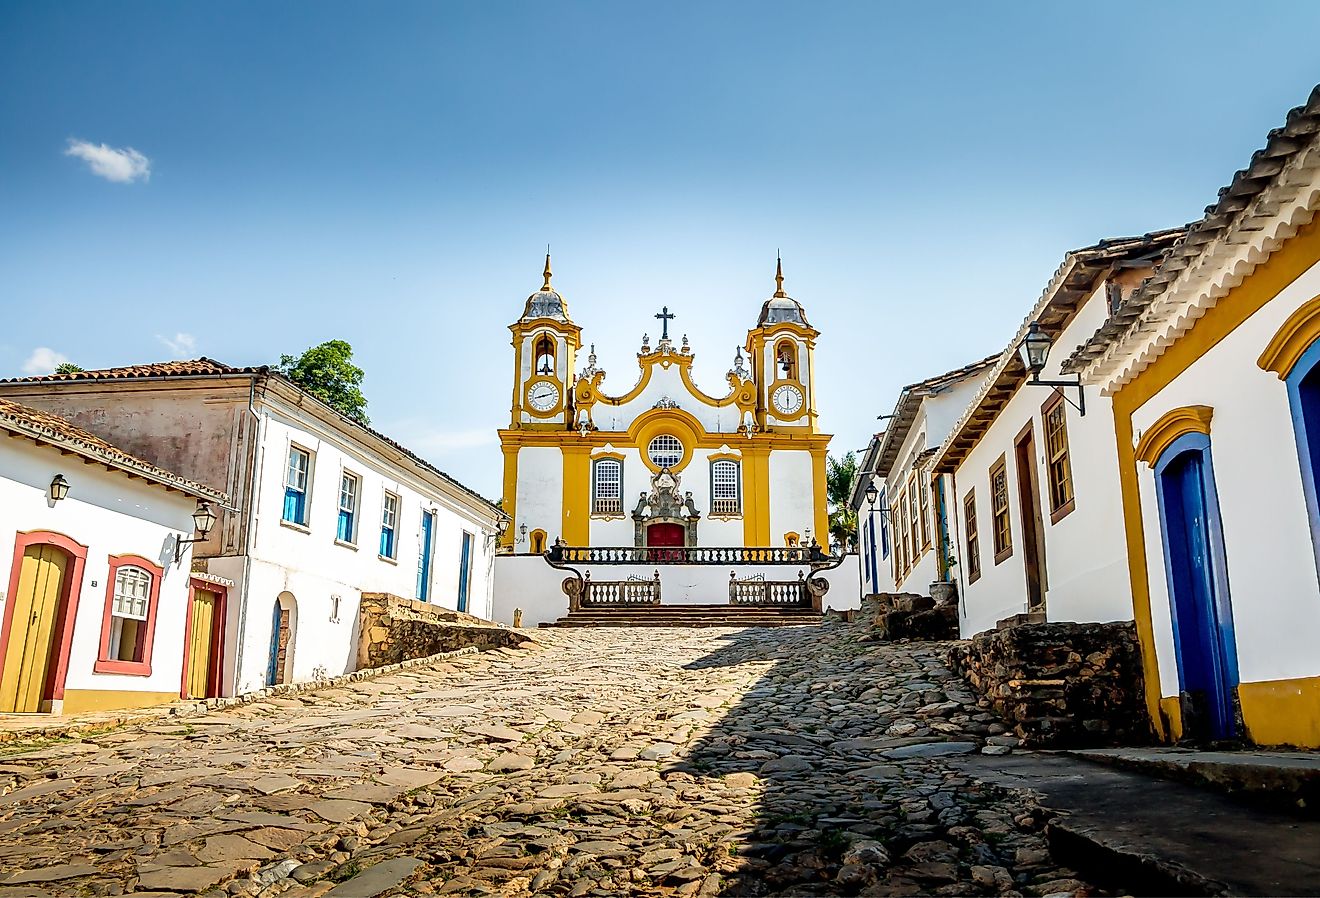 Colorful colonial houses and church in the city of Tiradentes in Brazil.